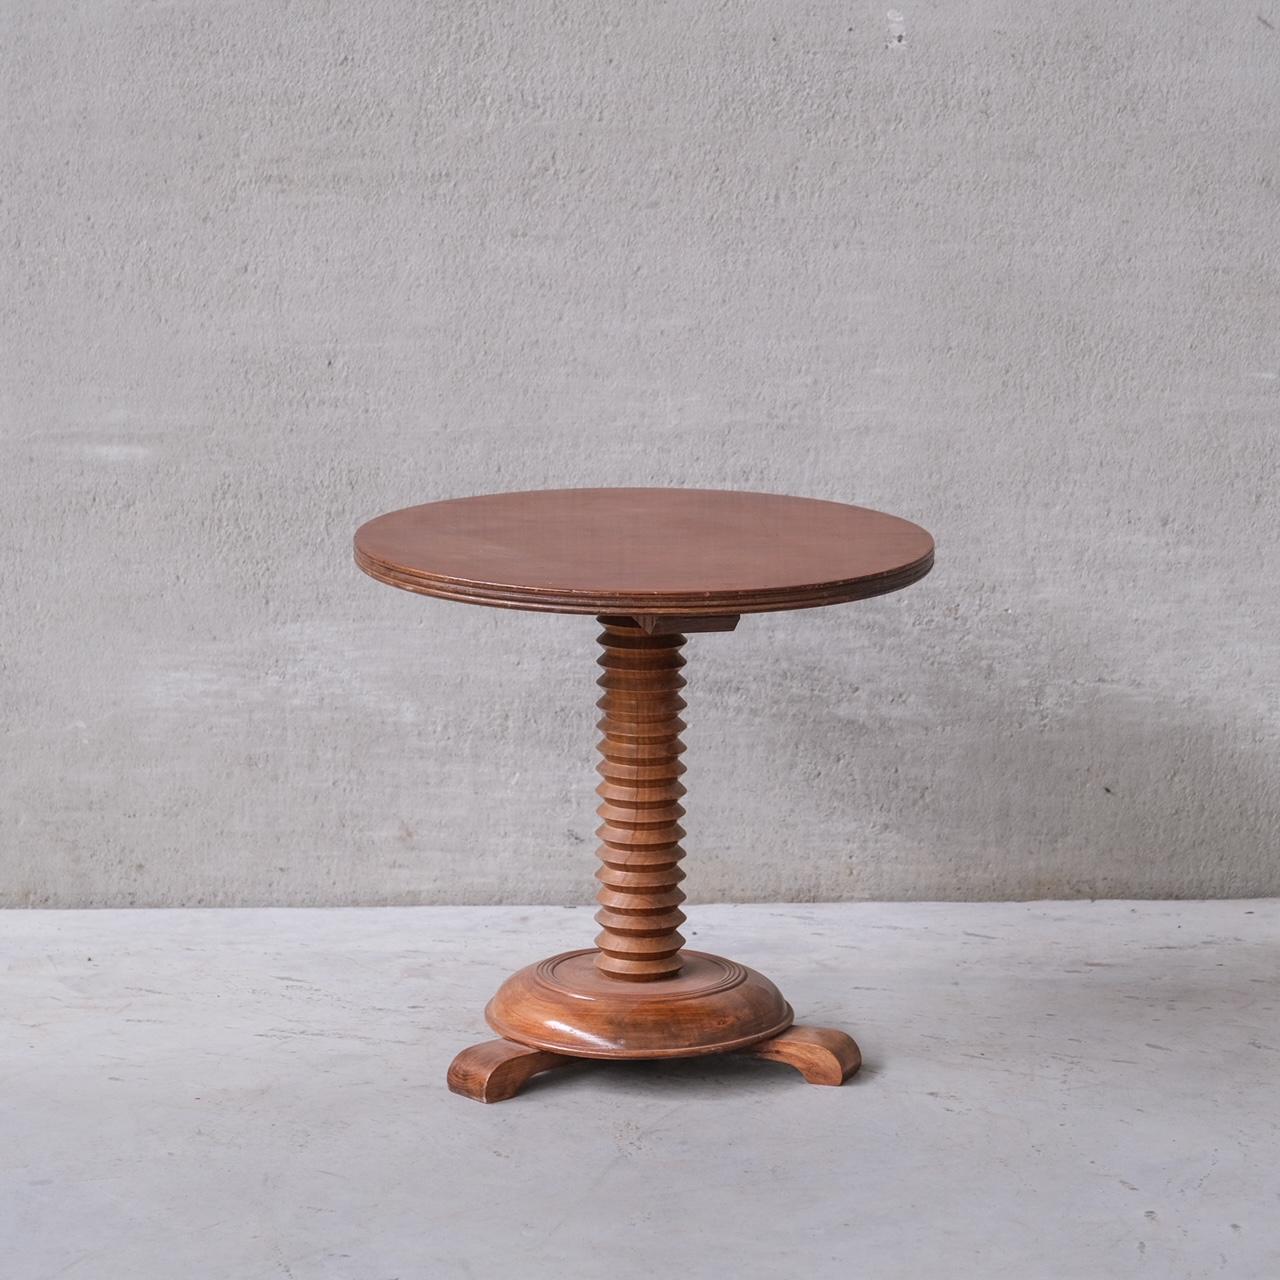 A good looking side table or display table. 

France, c1950s. 

Late deco in the manner of Charles Dudouyt. 

Generally good condition, some scuffs and wear commensurate with age. 

Location: Belgium Gallery. 

Dimensions: 55 H x 51 Diameter in cm.